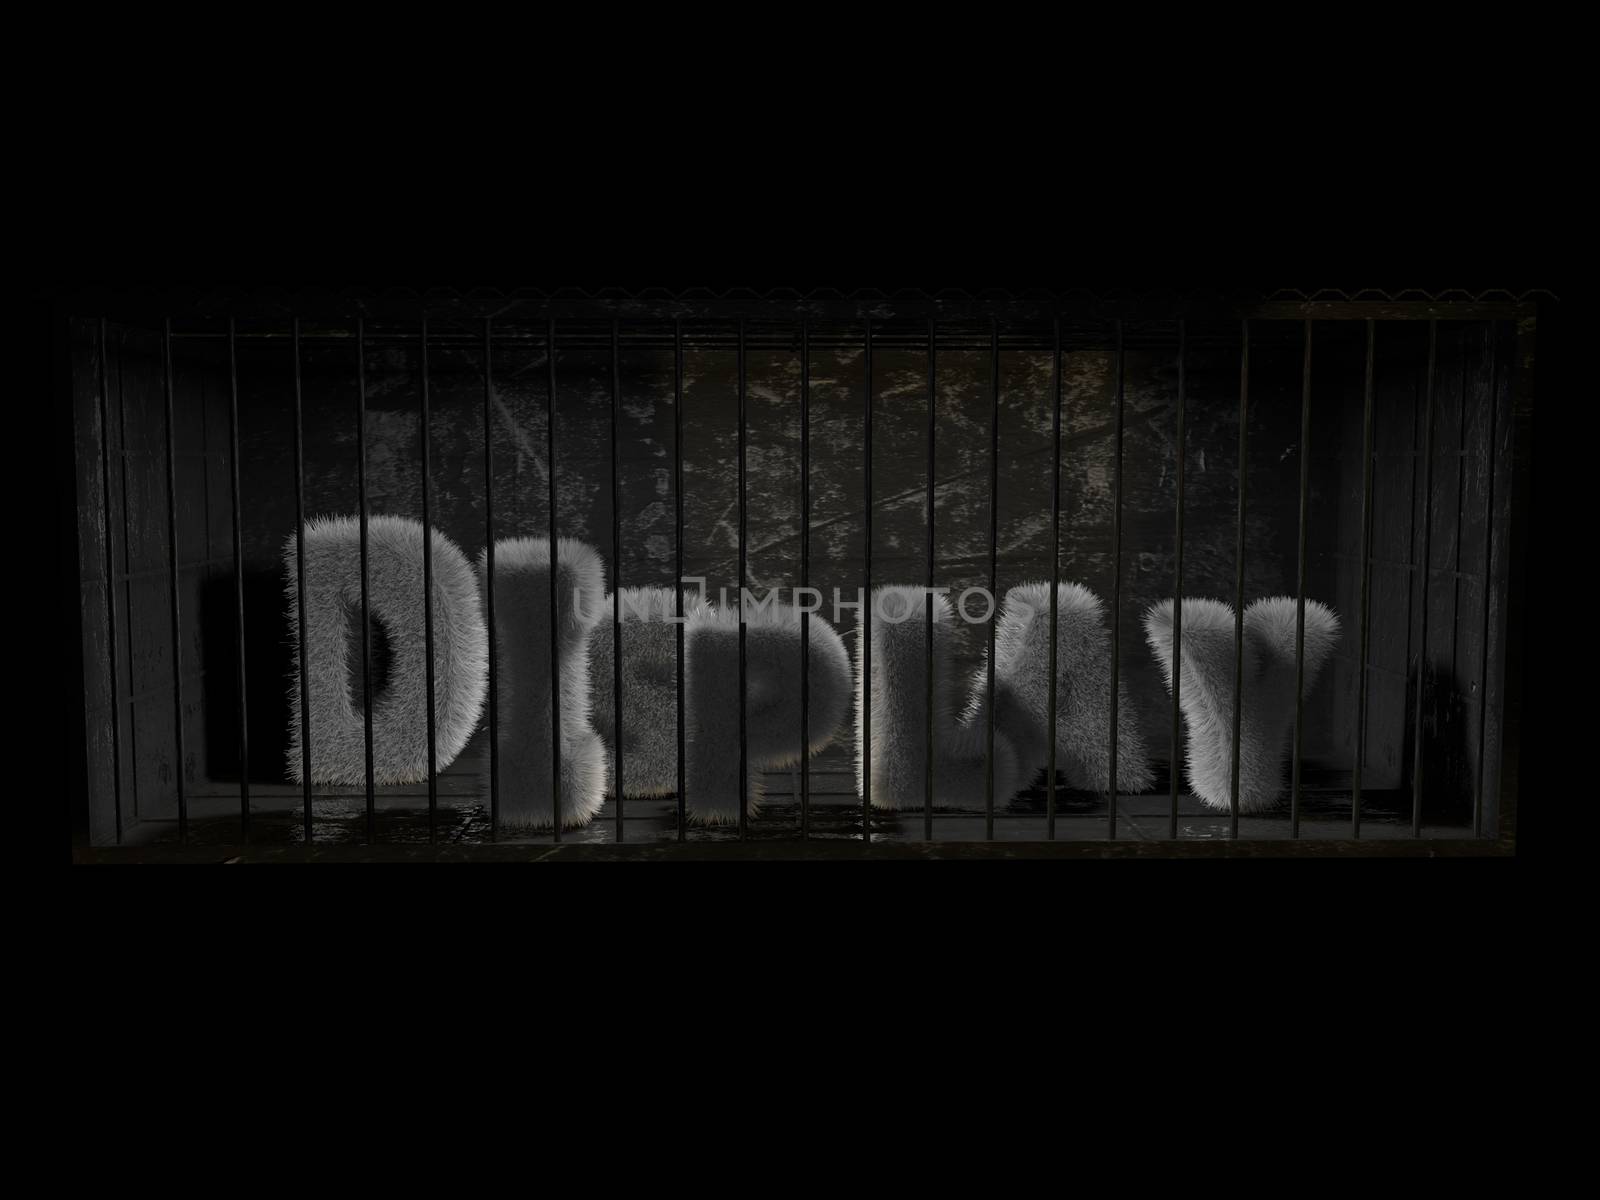 A fluffy word (display ) with white hair behind bars with black background.